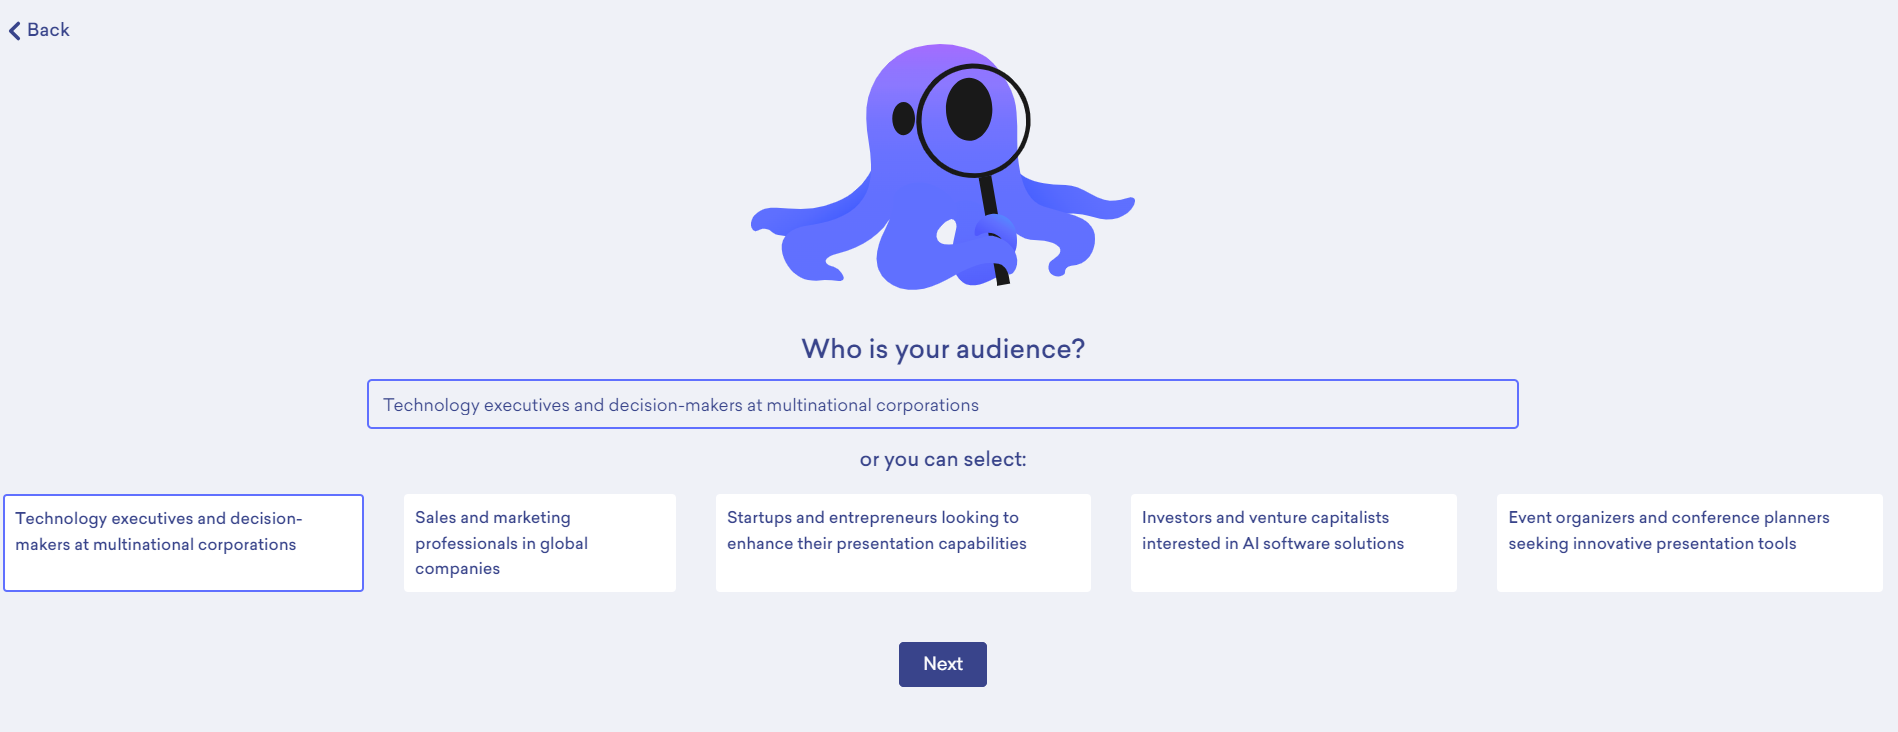 Image of audience screen